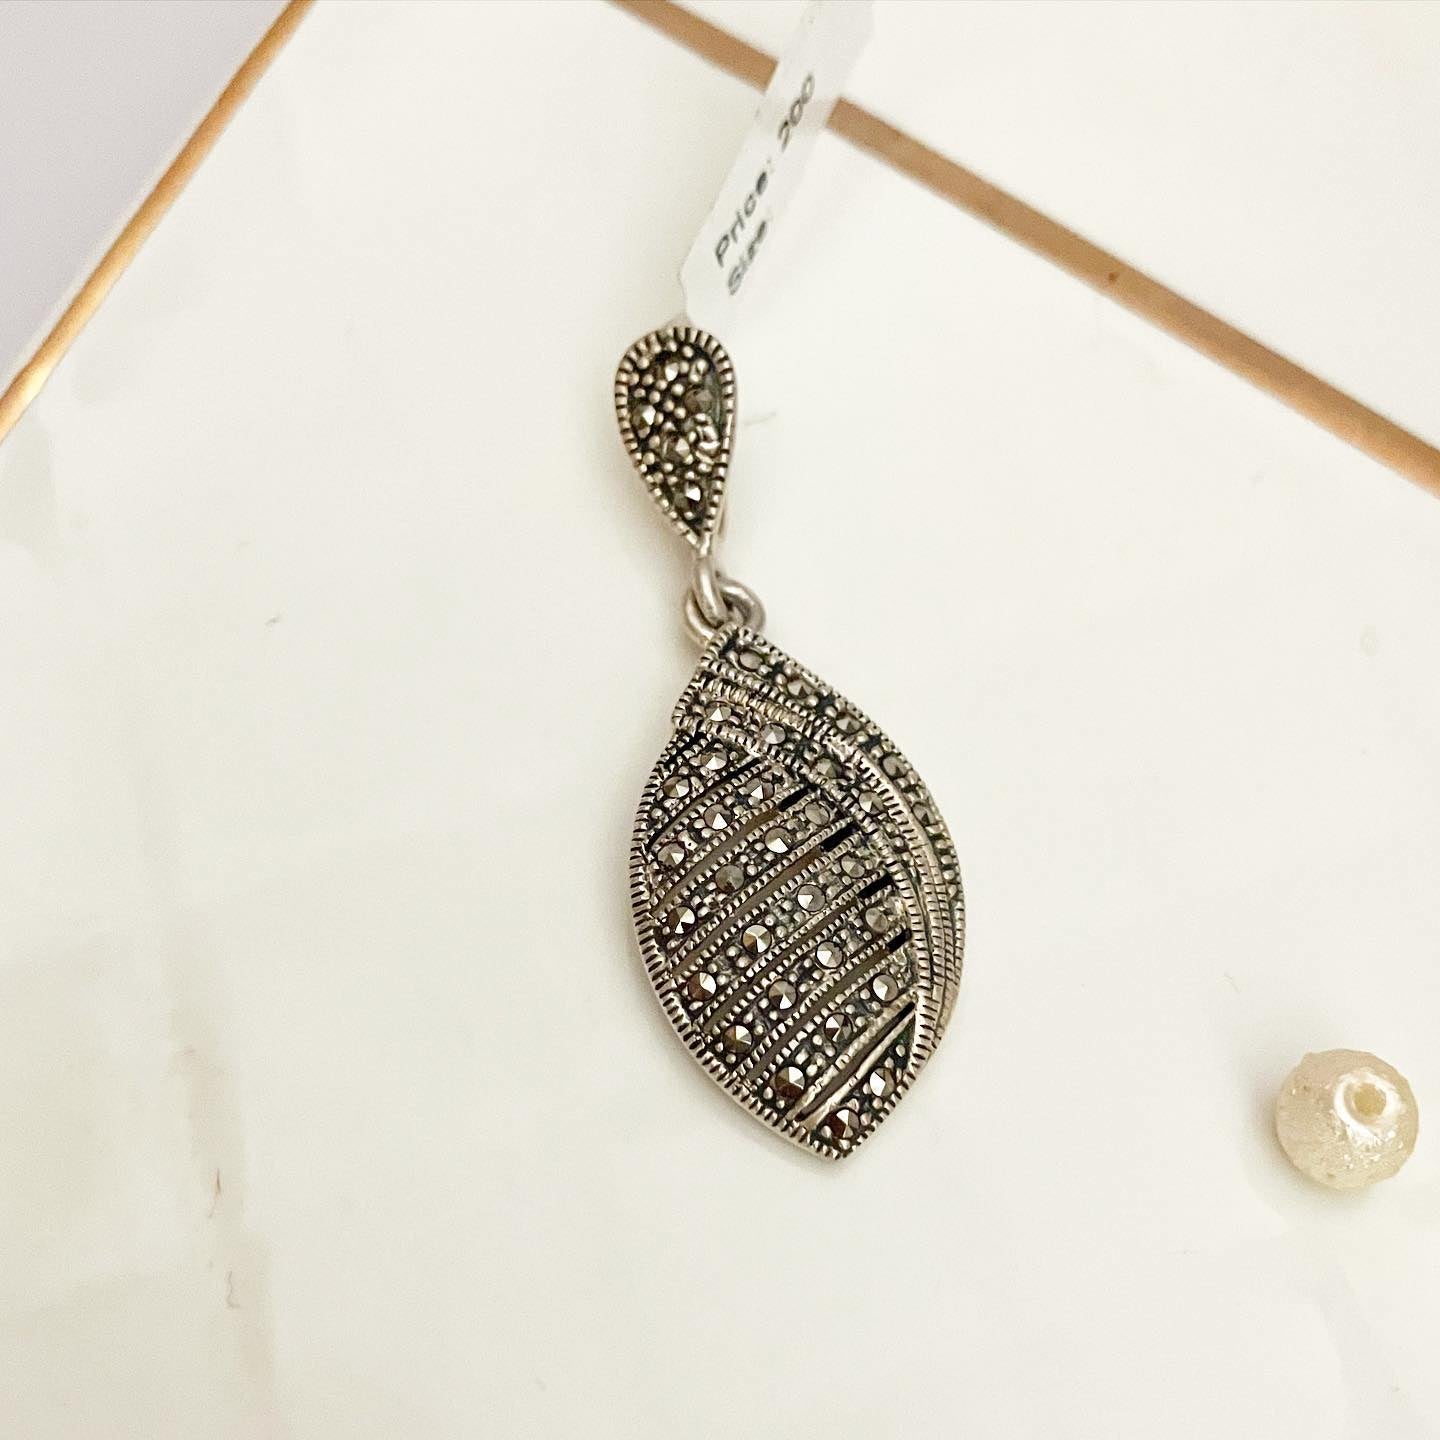 925 sterling silver pendant "Audrey"